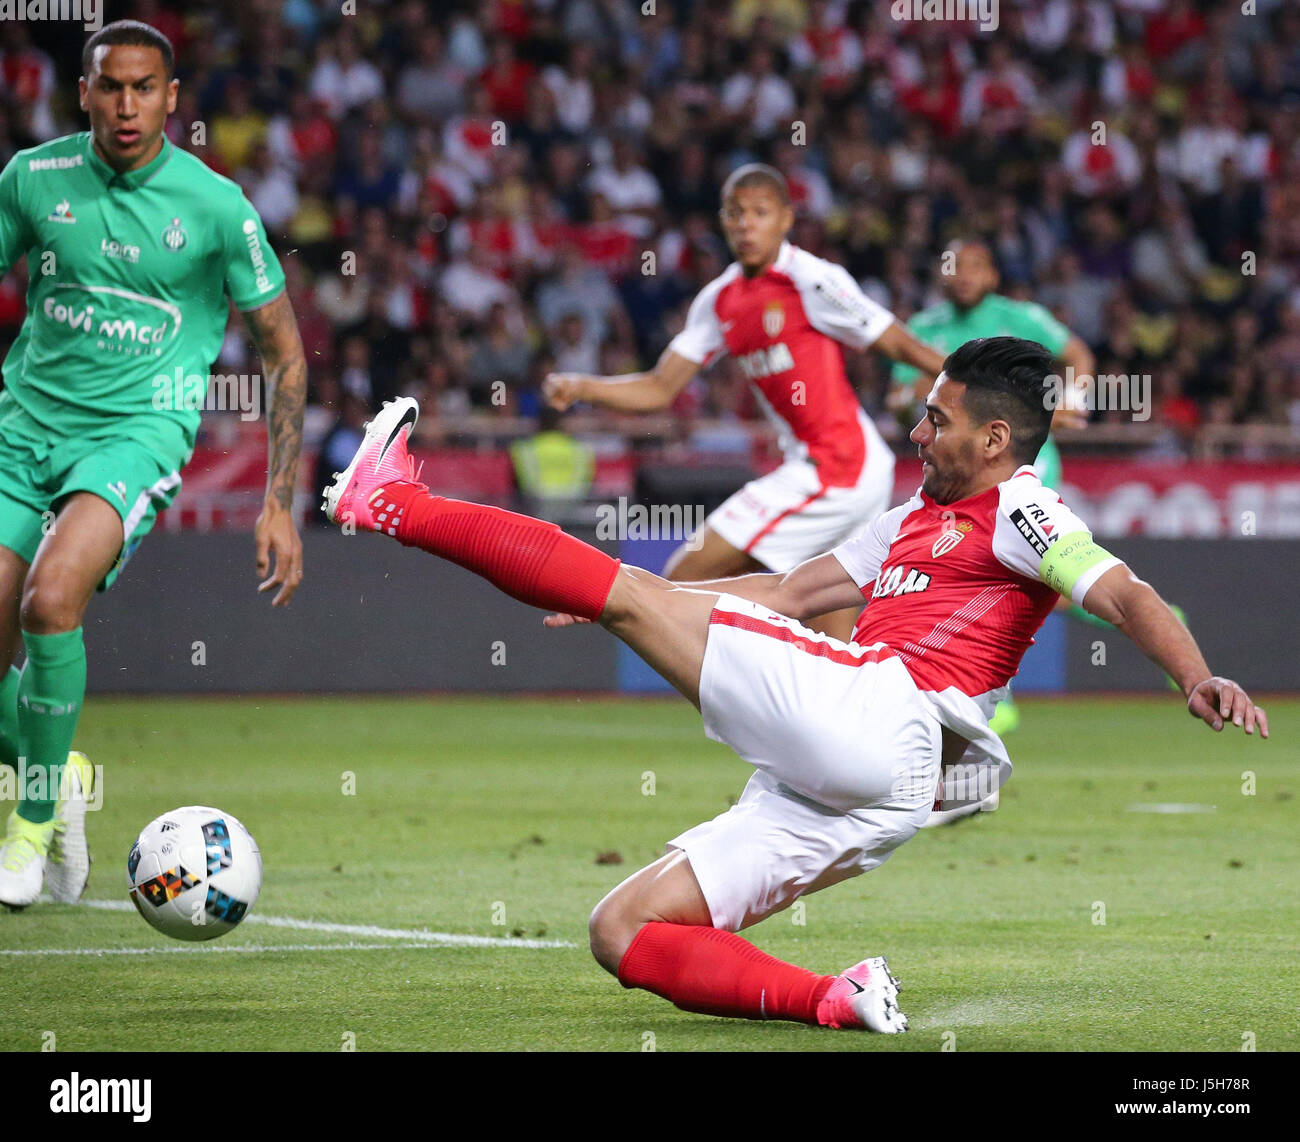 Frontvieille, Monaco. 17th May, 2017. Radamel Falcao (R) of AS Monaco vies during the match against St-Etienne of French Ligue 1 in Fontvieille, Monaco on May 17, 2017. AS Monaco won 2-0 and claimed the championship of the season in advance. (Xinhua/Serge Haouzi) Credit: Xinhua/Alamy Live News Stock Photo